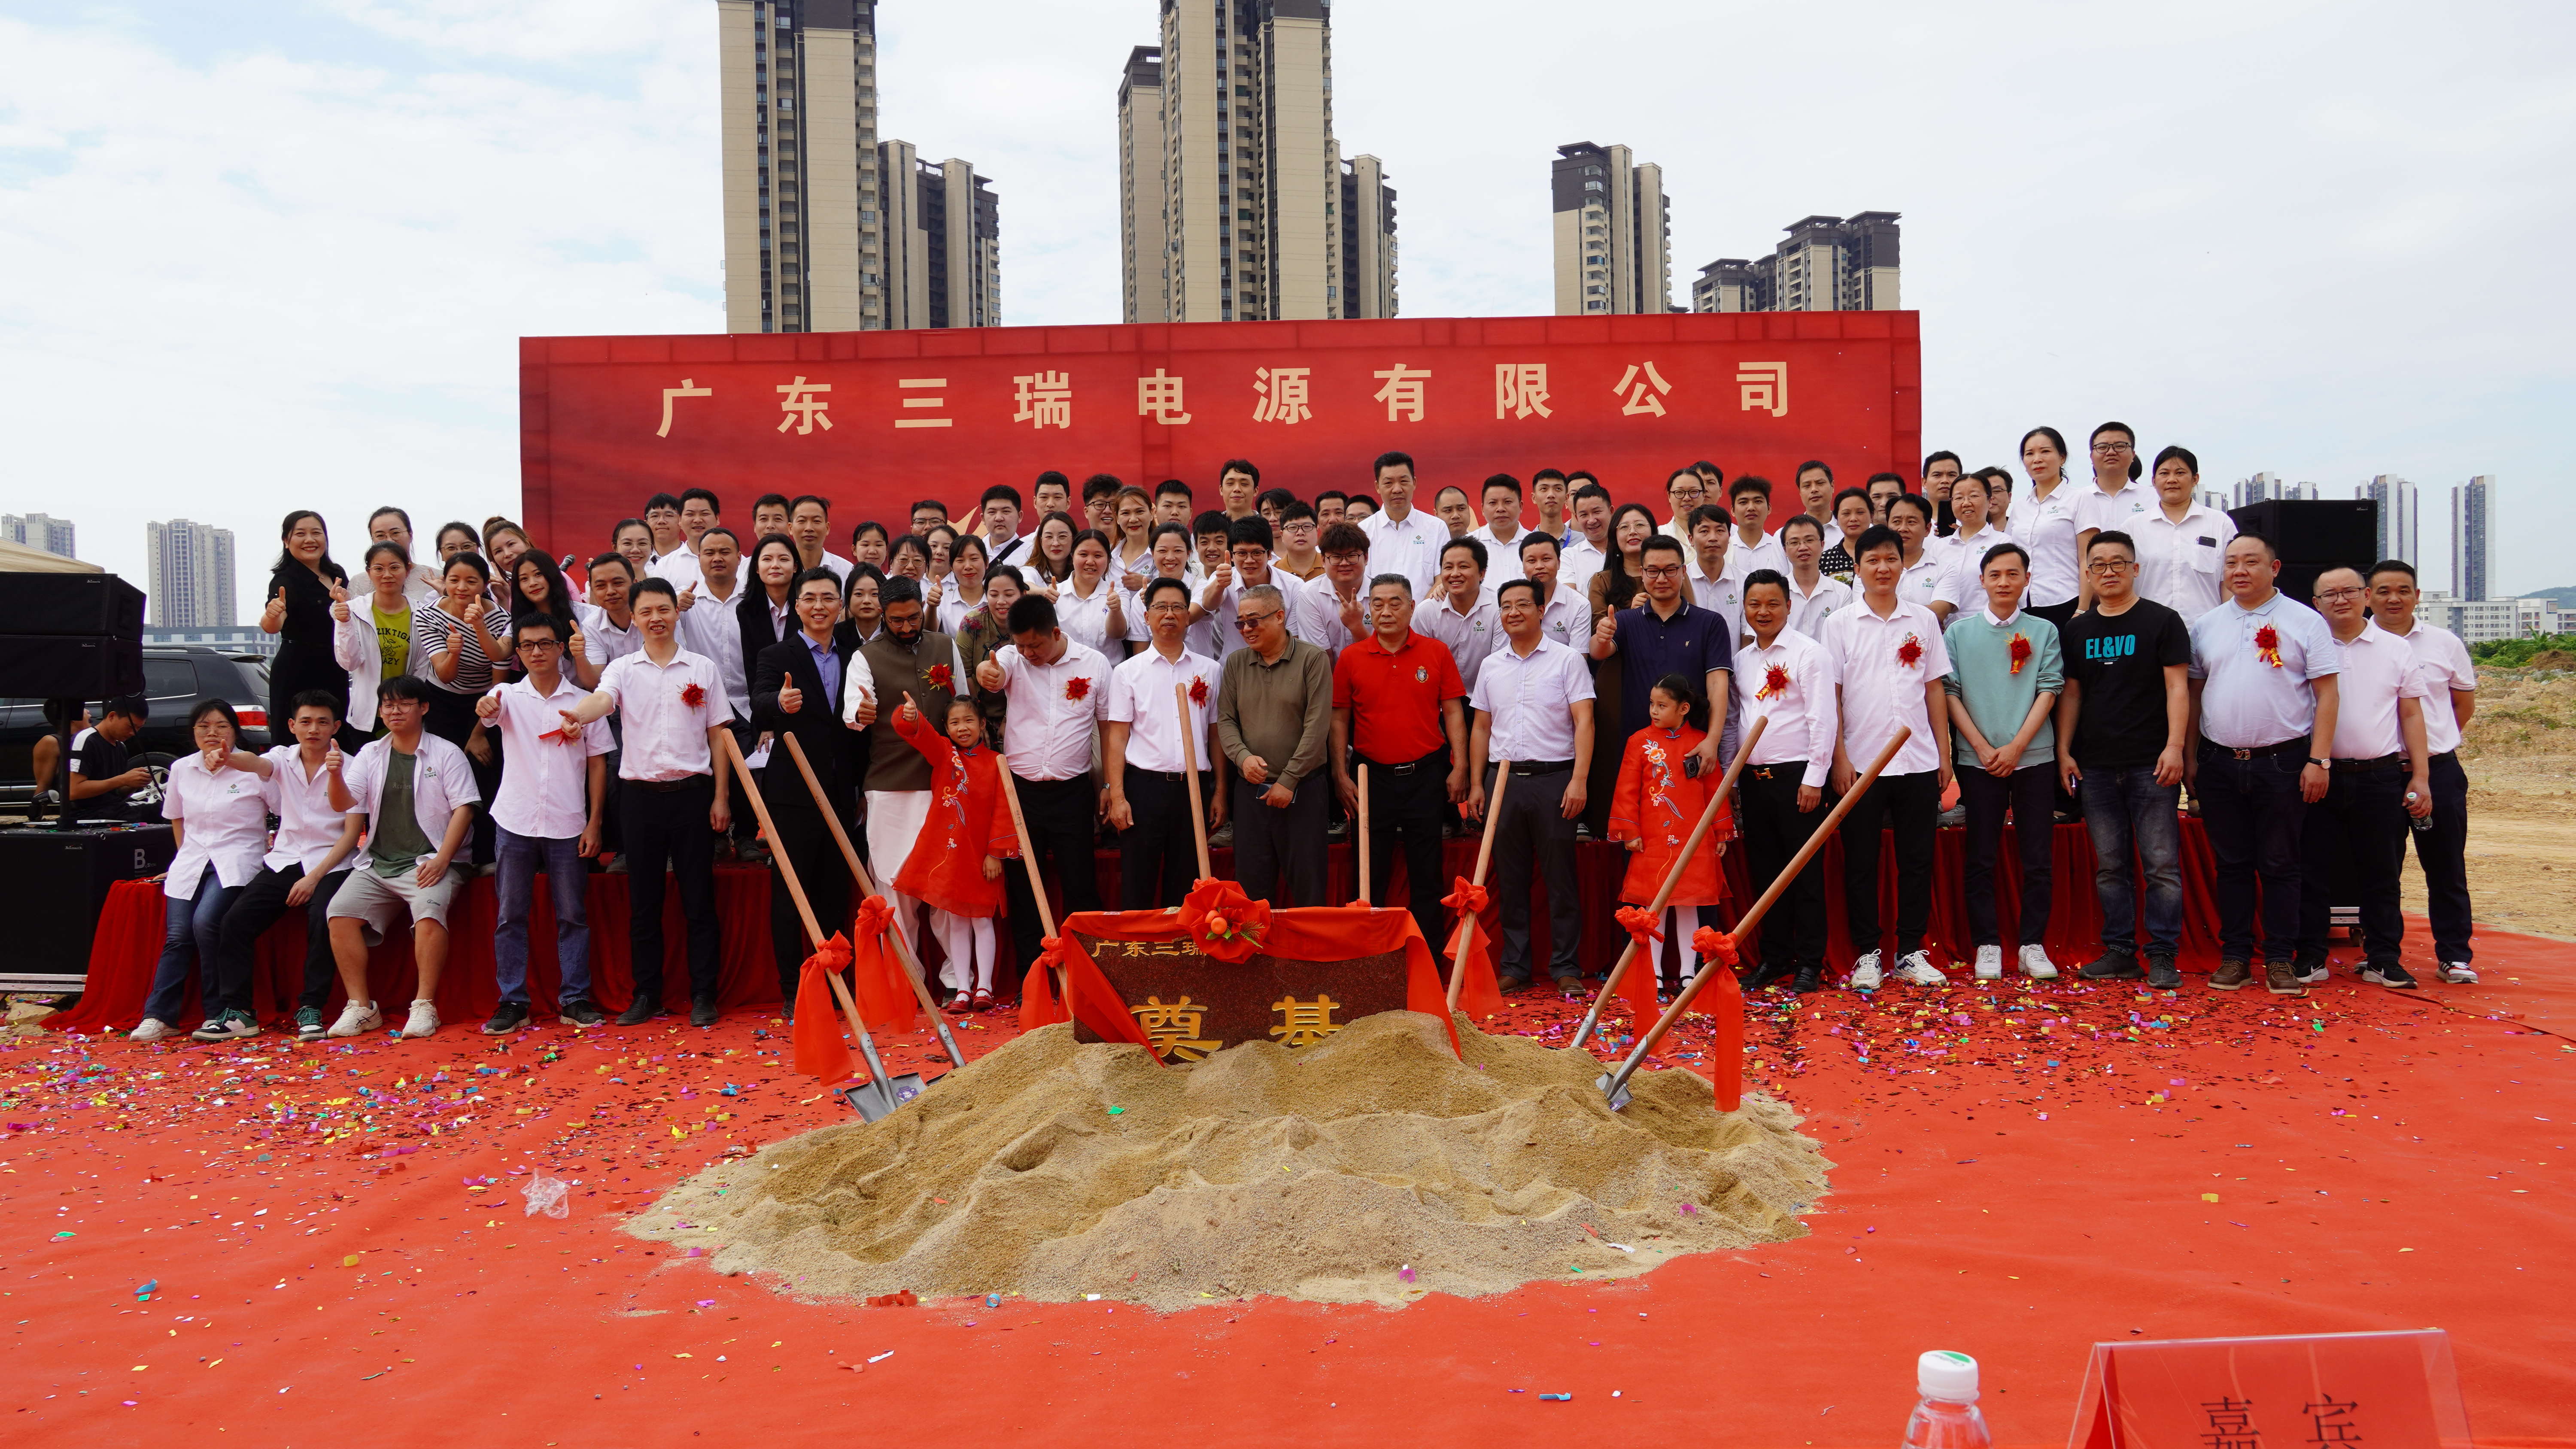 Groundbreaking ceremony for Guangdong Sunray Power Co., Ltd